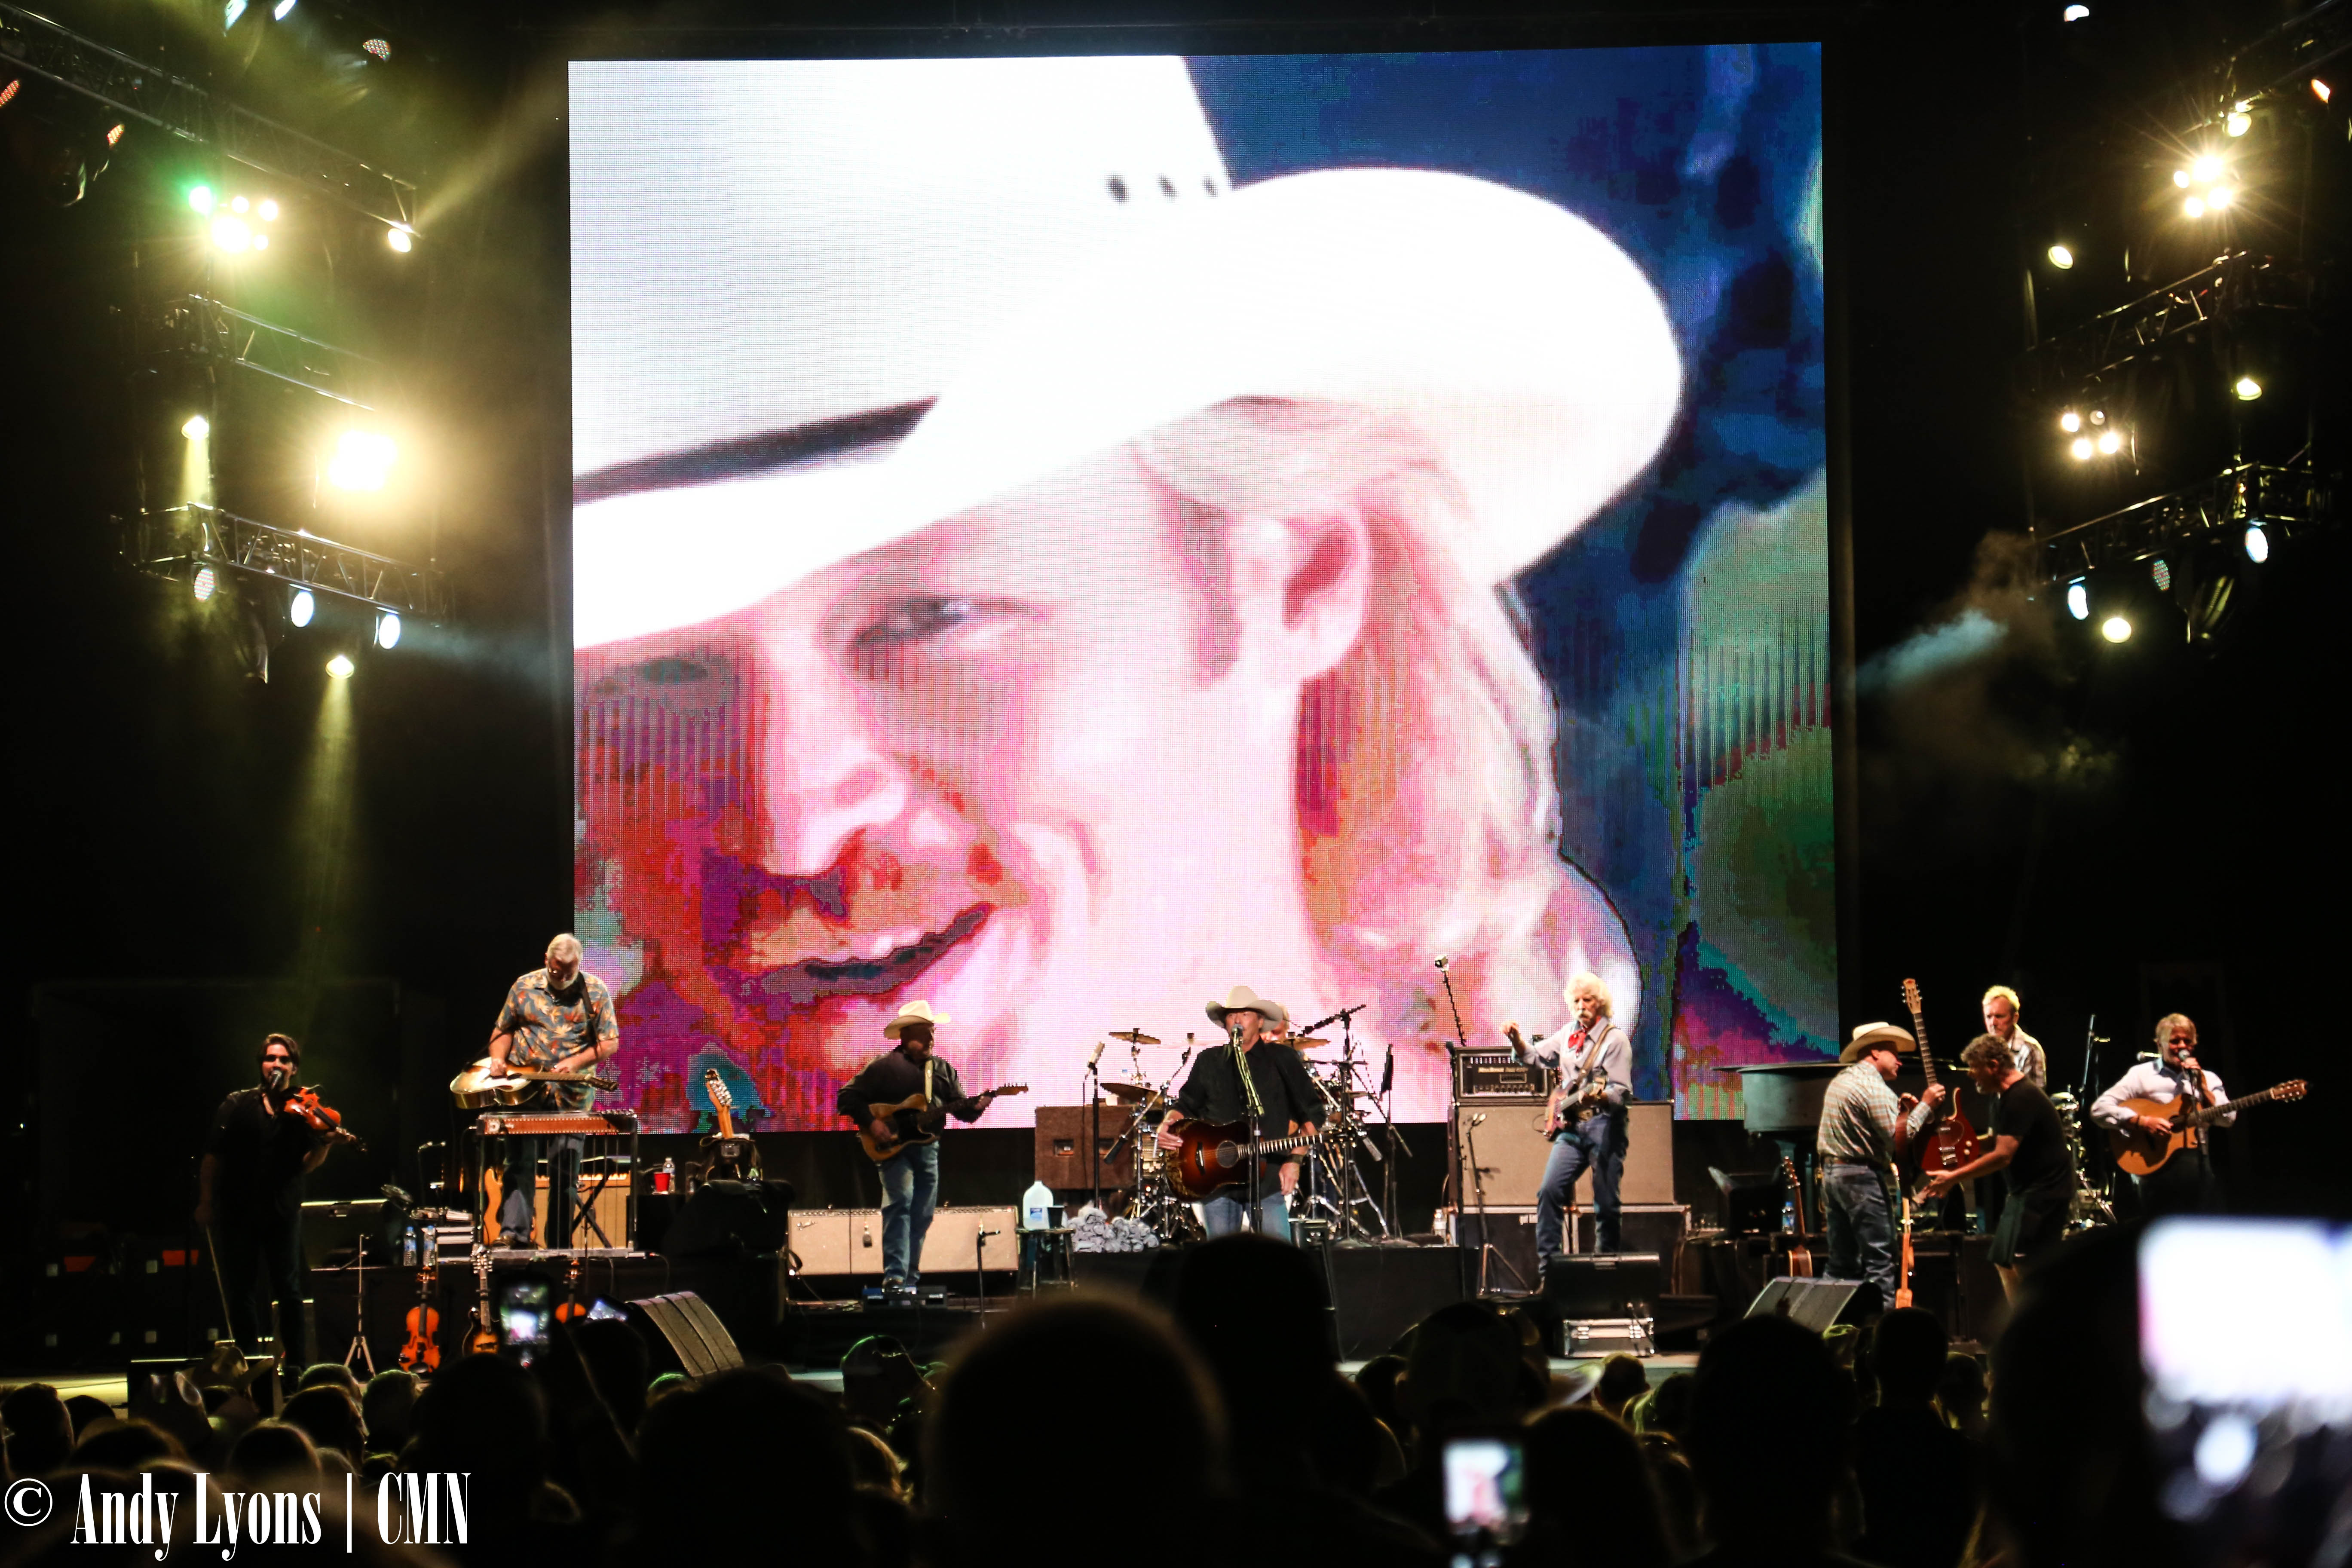 Lee Ann Womack & Alan Jackson play for sold-out crowd at Missouri State Fair